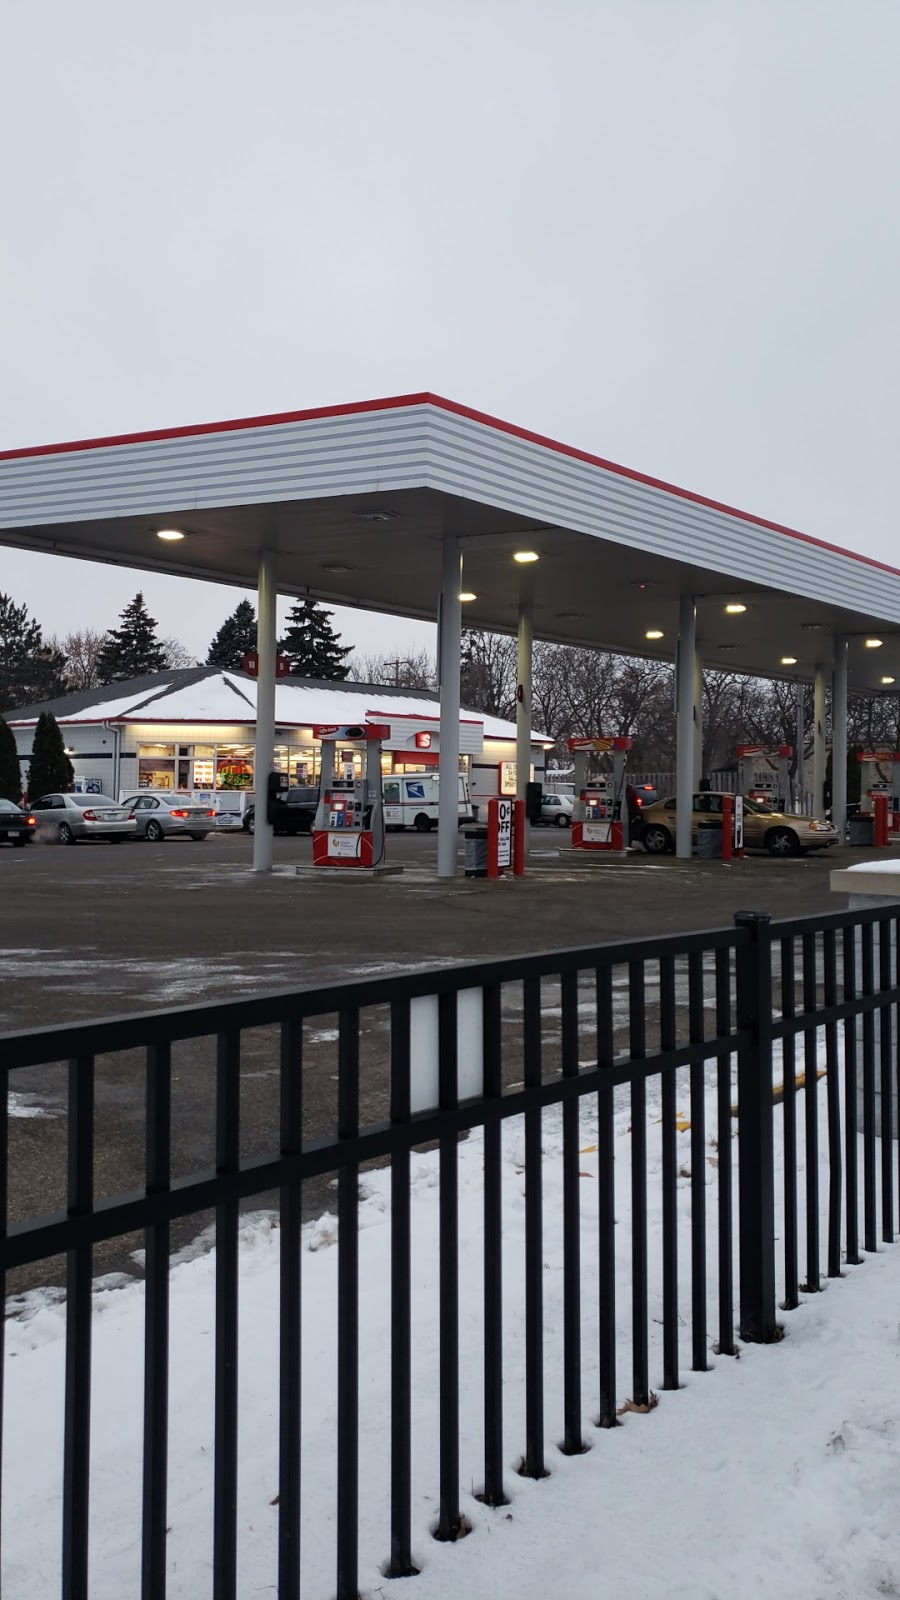 Speedway | 1901 57th Ave N, Brooklyn Center, MN 55430, USA | Phone: (763) 560-0081